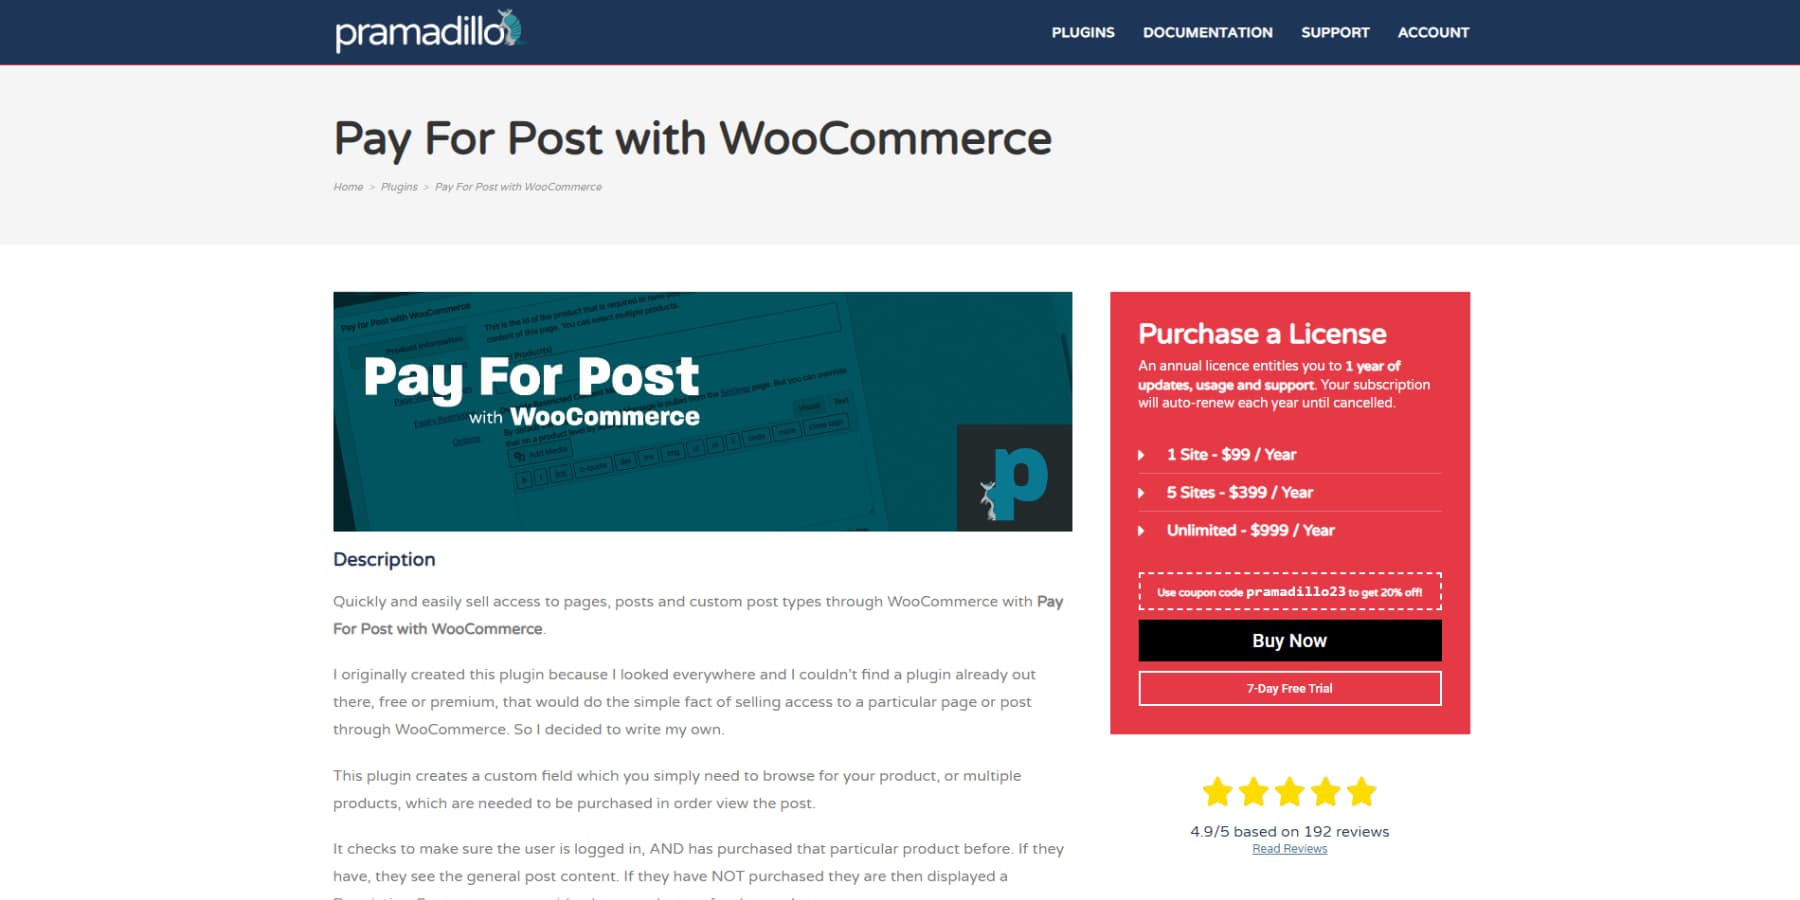 A screenshot of Pay For Post With WooCommerce's homepage